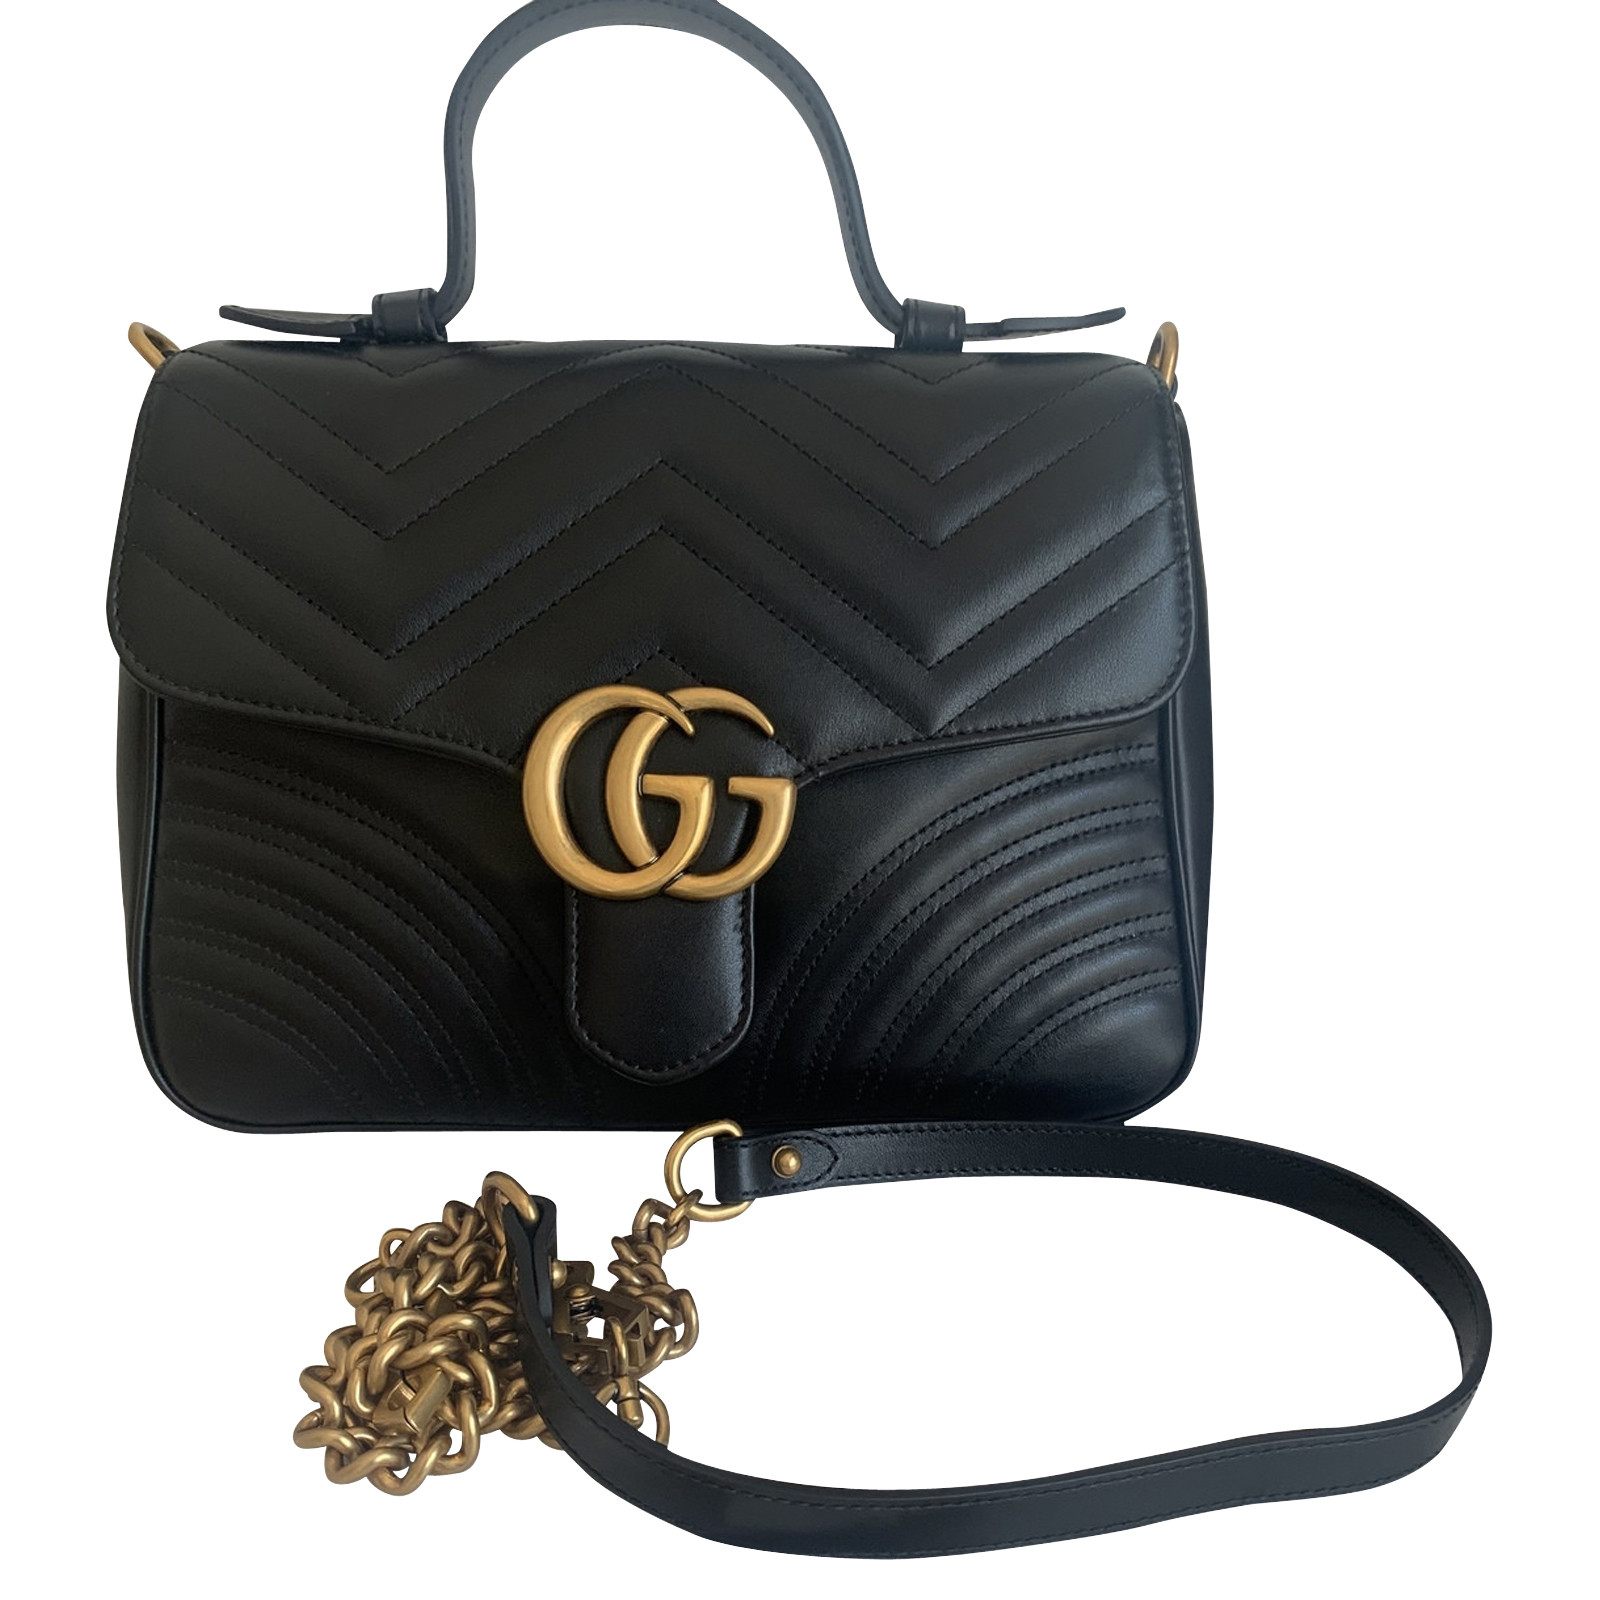 Gucci GG Marmont Top Handle Leather in Black Second Hand Gucci GG Marmont Top Handle Bag in Black buy used for (5738897)